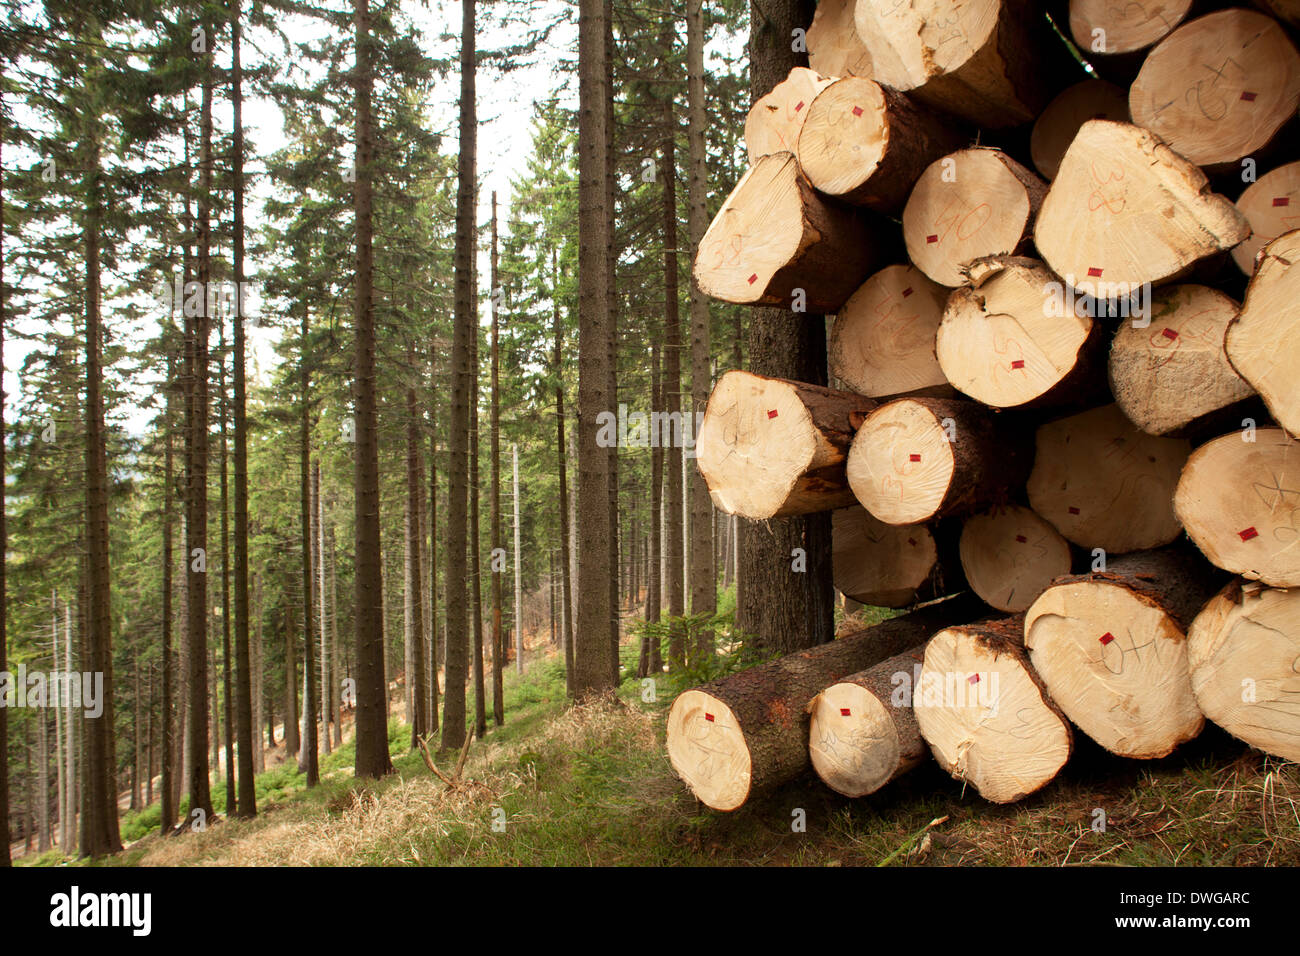 tree felling in big forest, trunks Stock Photo